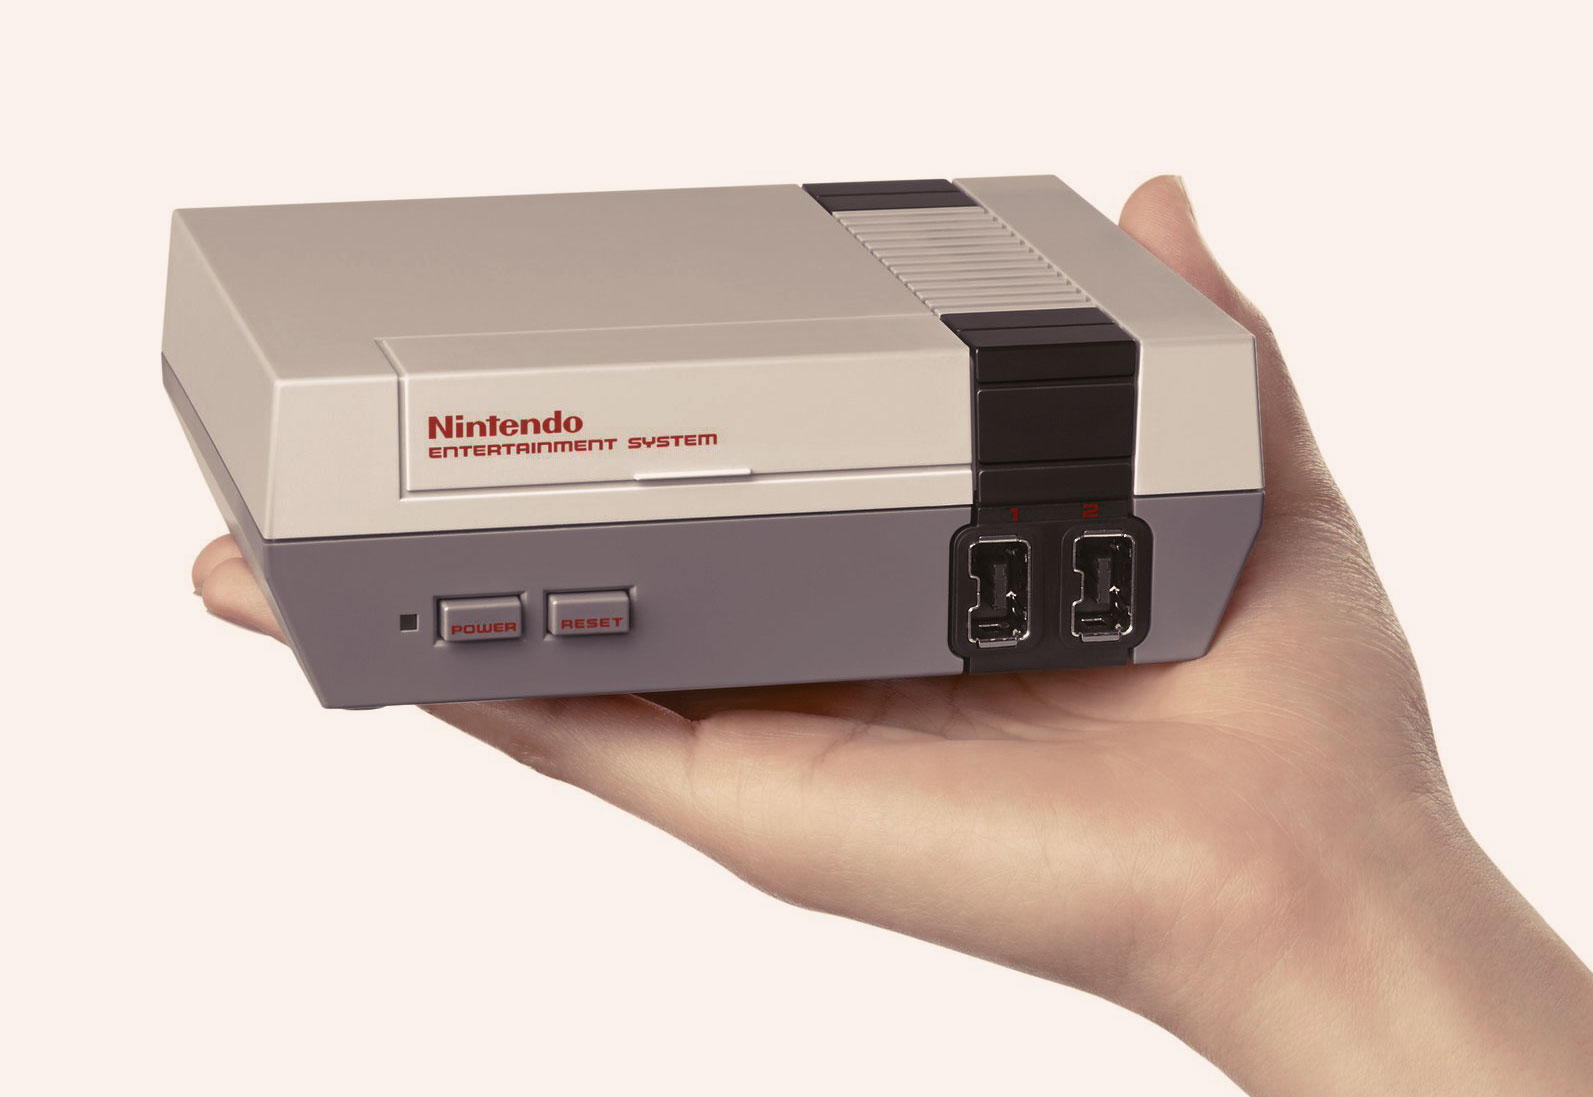 NES Classic Edition looks like great fun—but will it hack? / Boing Boing1593 x 1097